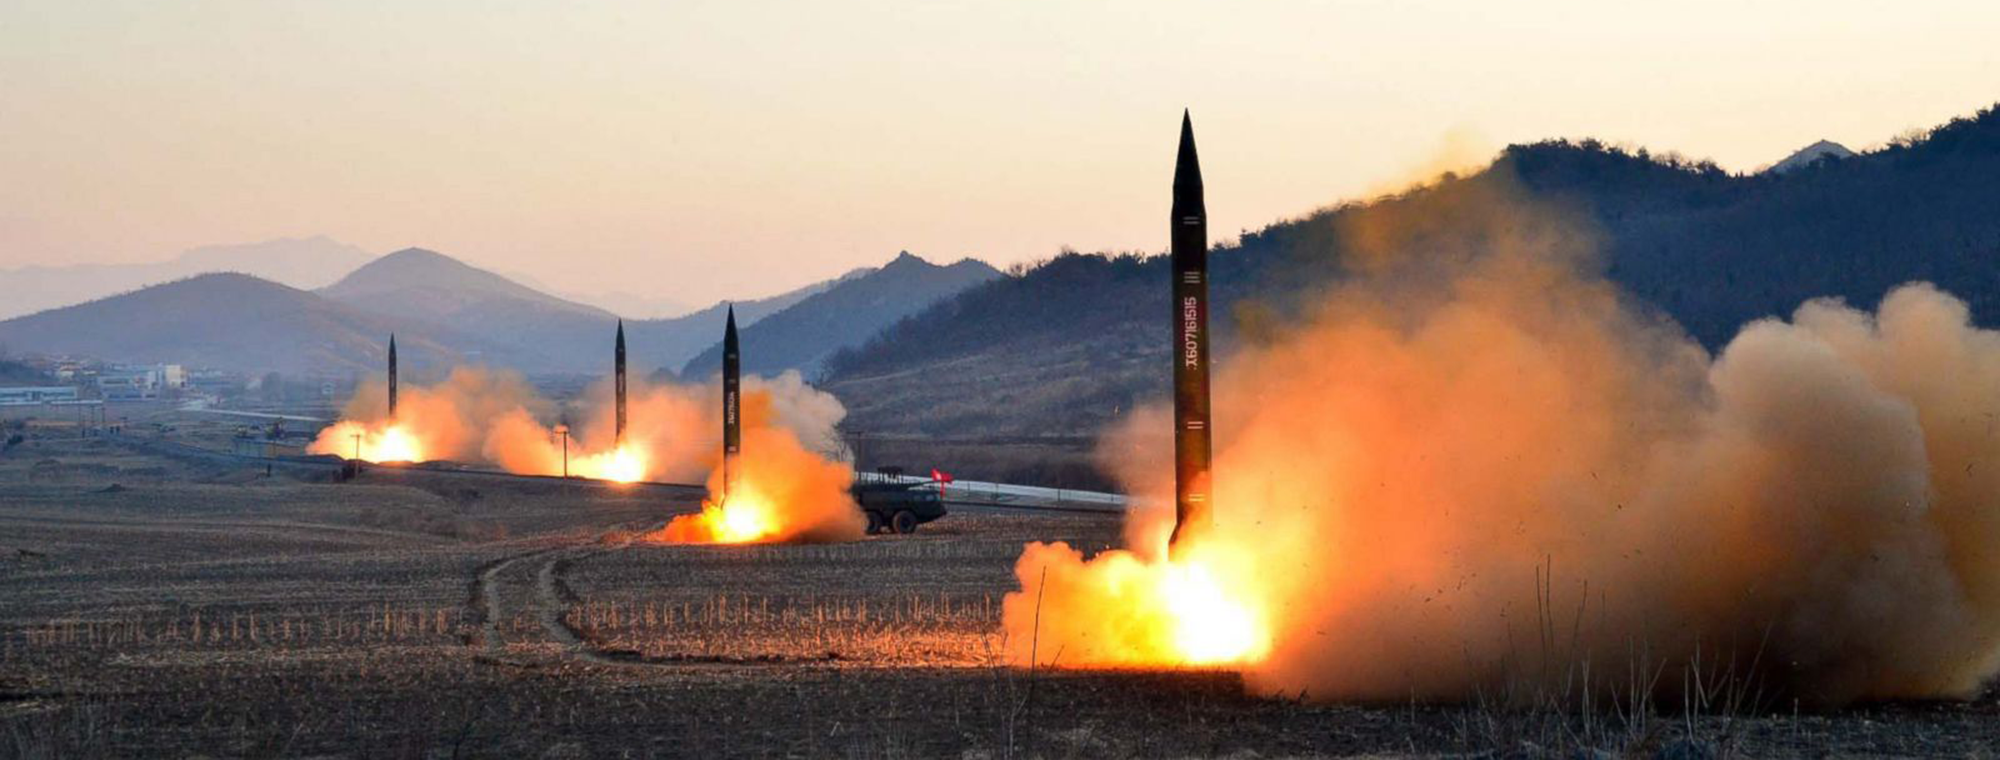 North Korea missile launch, undated, KCNA